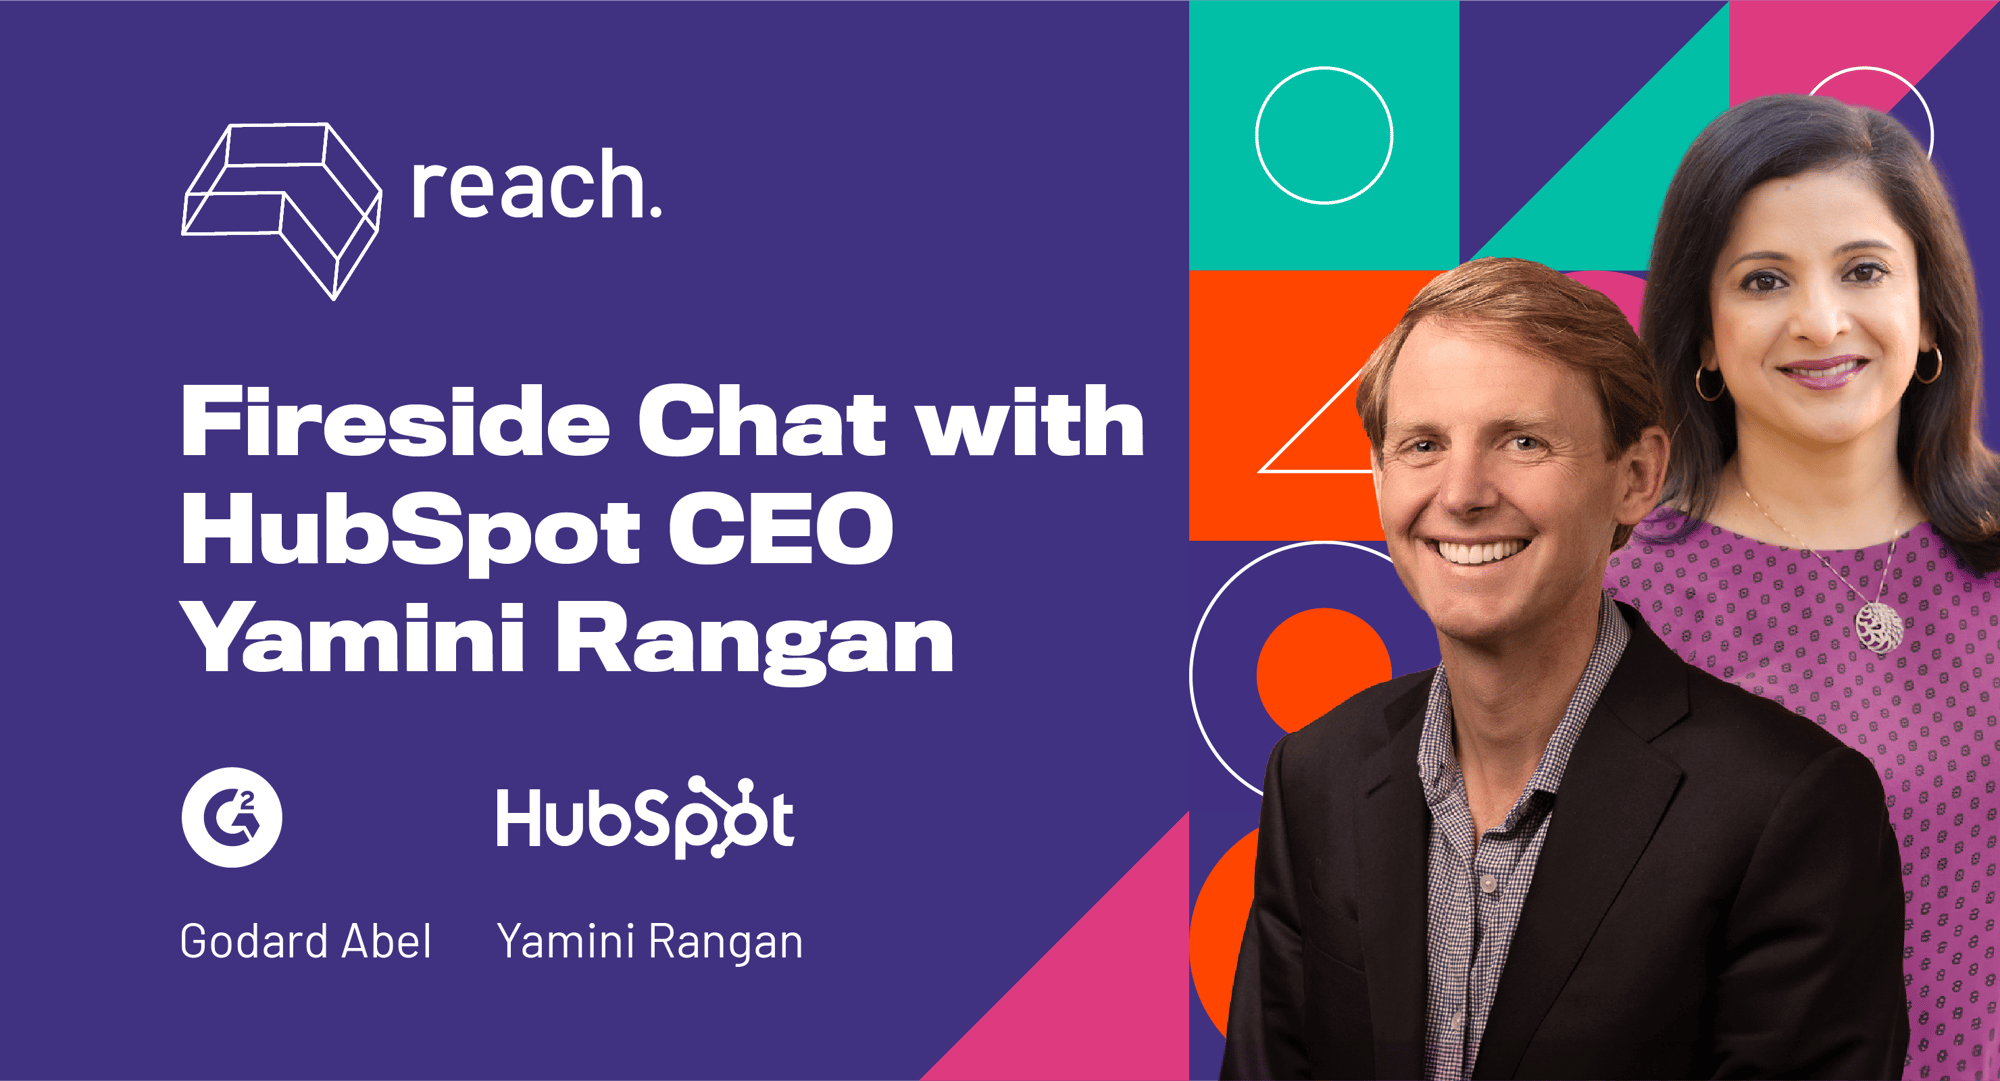 Fireside chat with Hubspot CEO